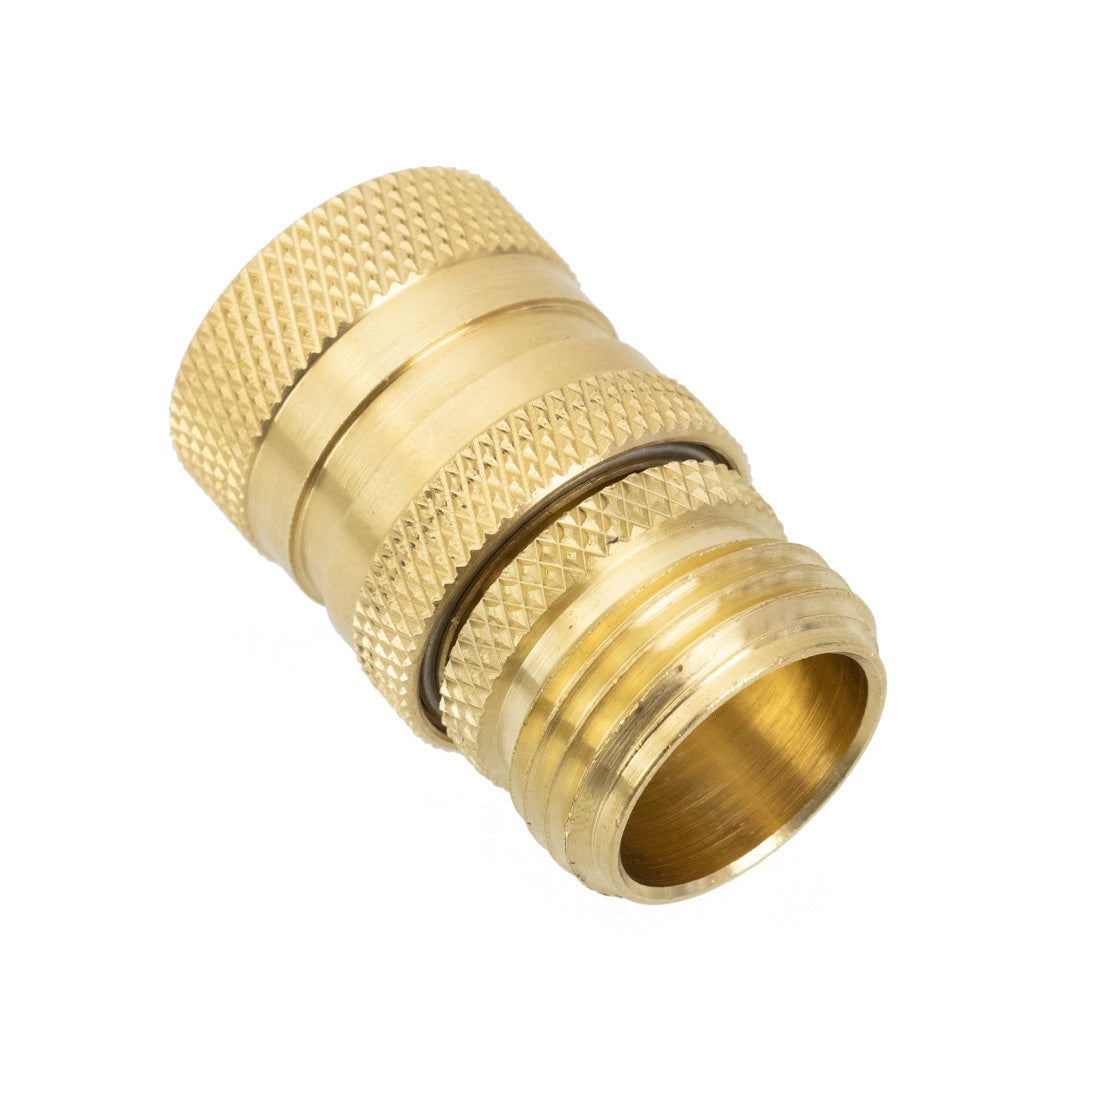 Garden Hose Quick Connect Male and Female Set - Brass - Assembled Tilted Left Bottom Angle View